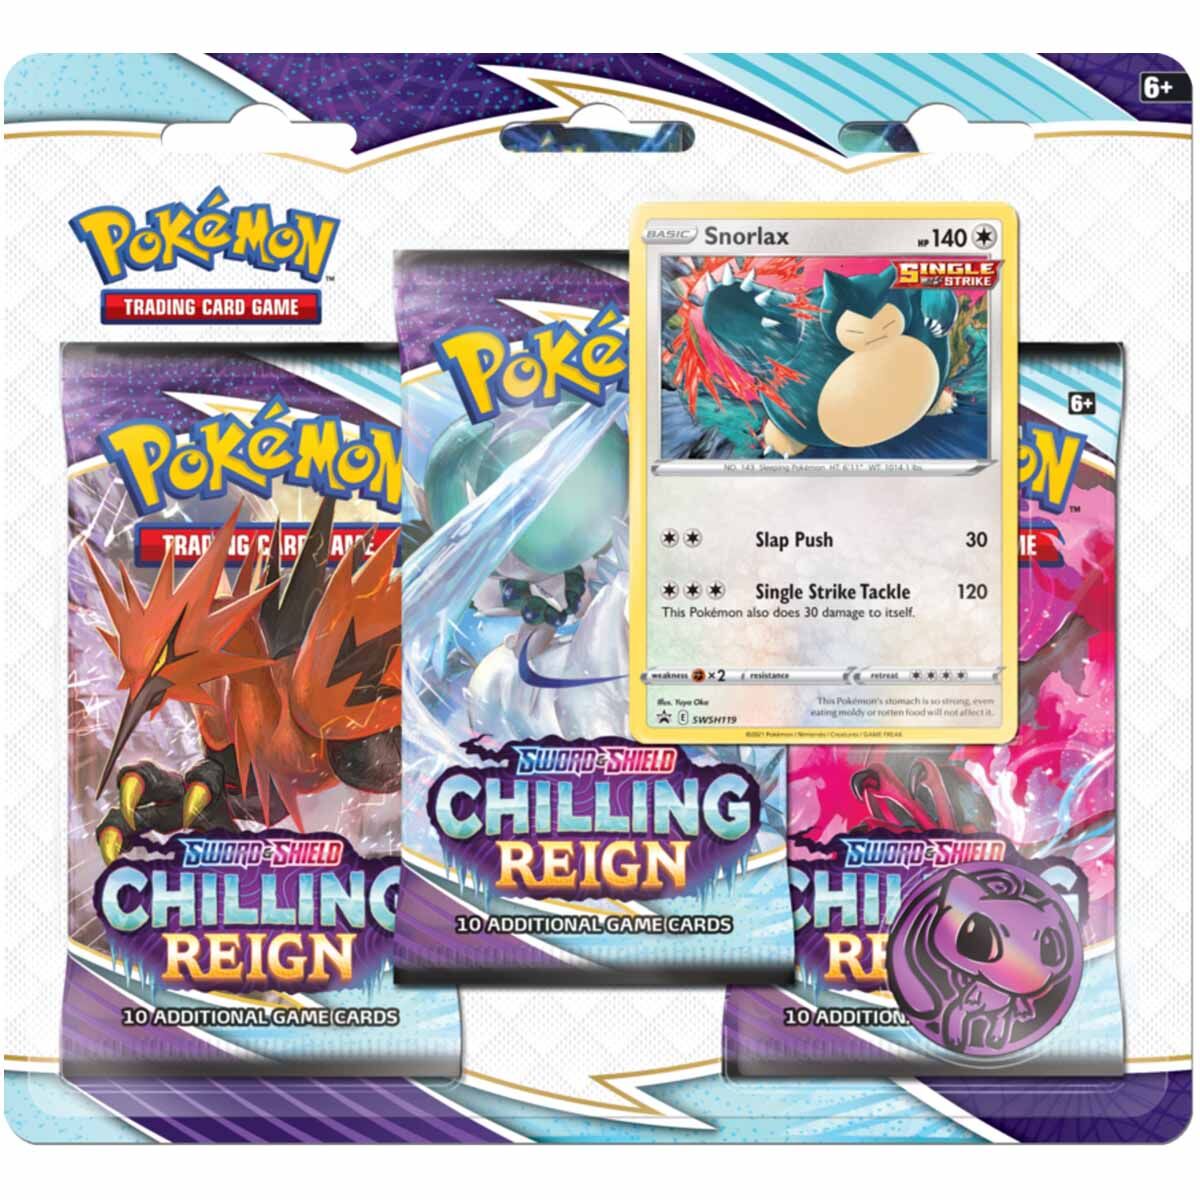 Pokémon Sword & Shield Chilling Reign Snorlax Collection Blister